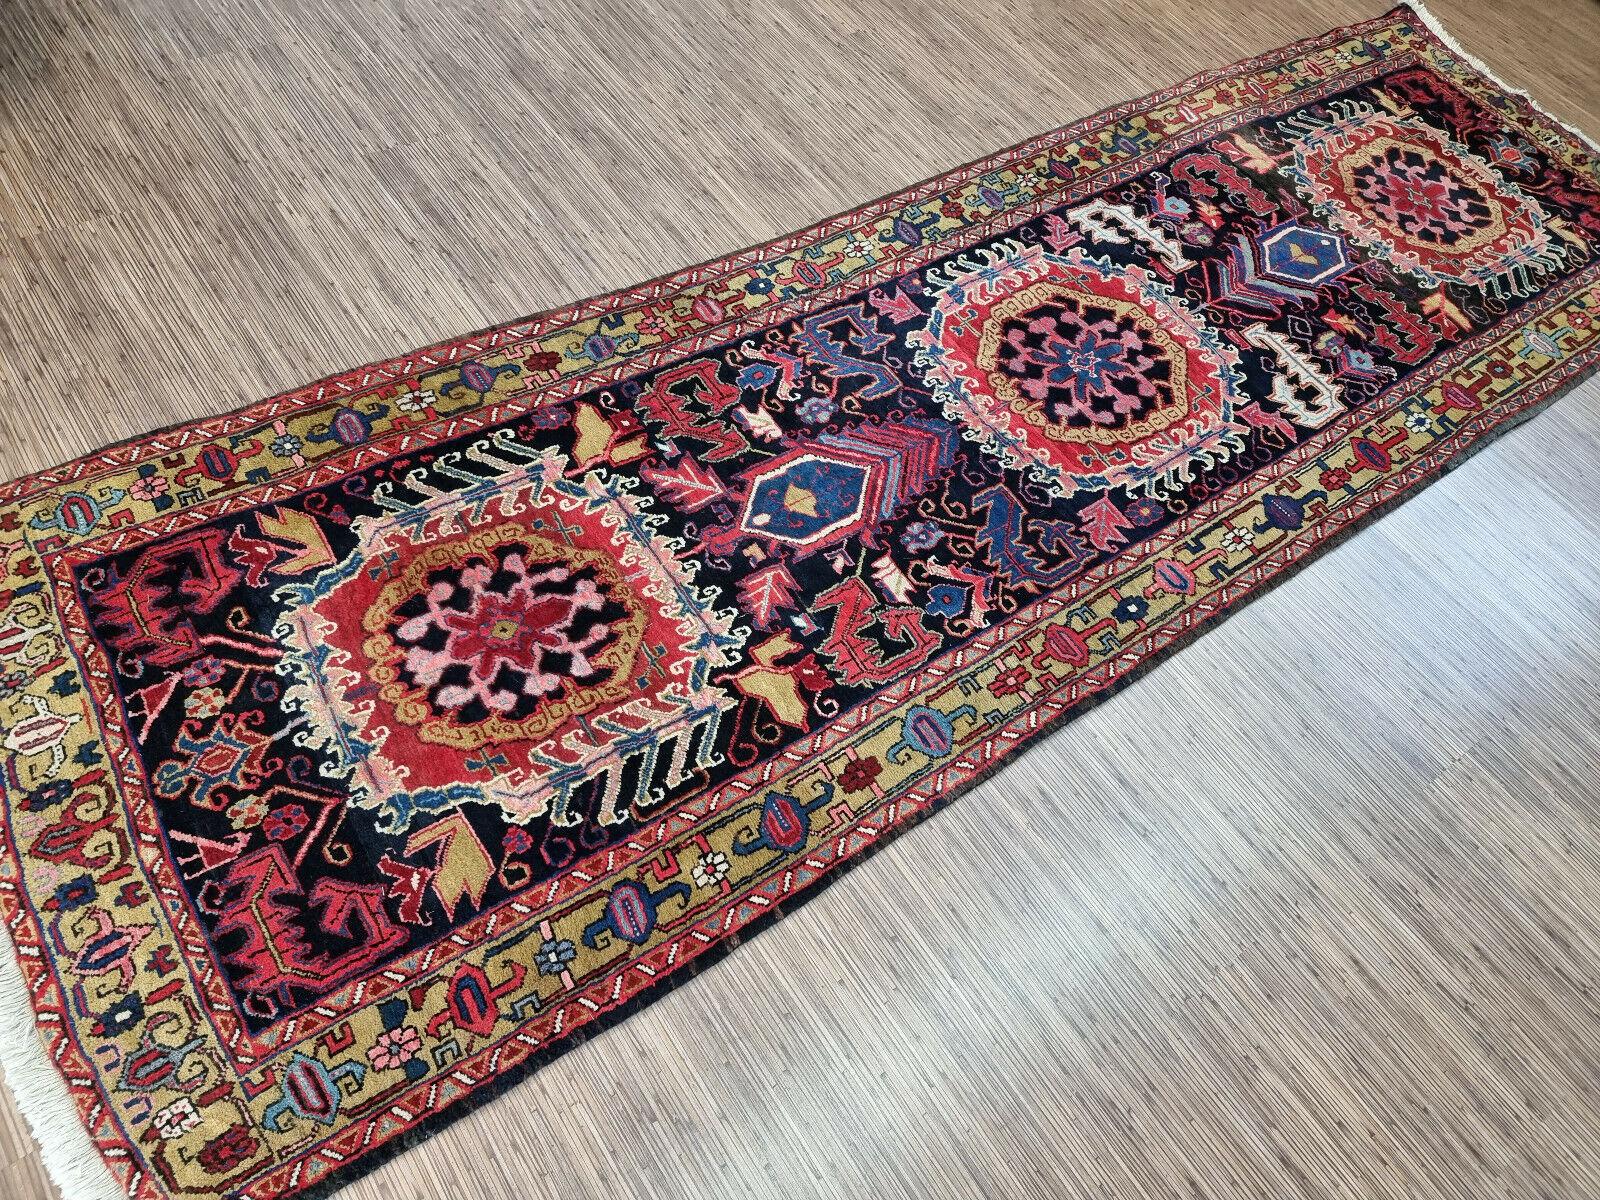 Handmade Antique Persian Style Heriz Runner Rug 3.7' x 12.1', 1920s - 1D78 In Good Condition For Sale In Bordeaux, FR